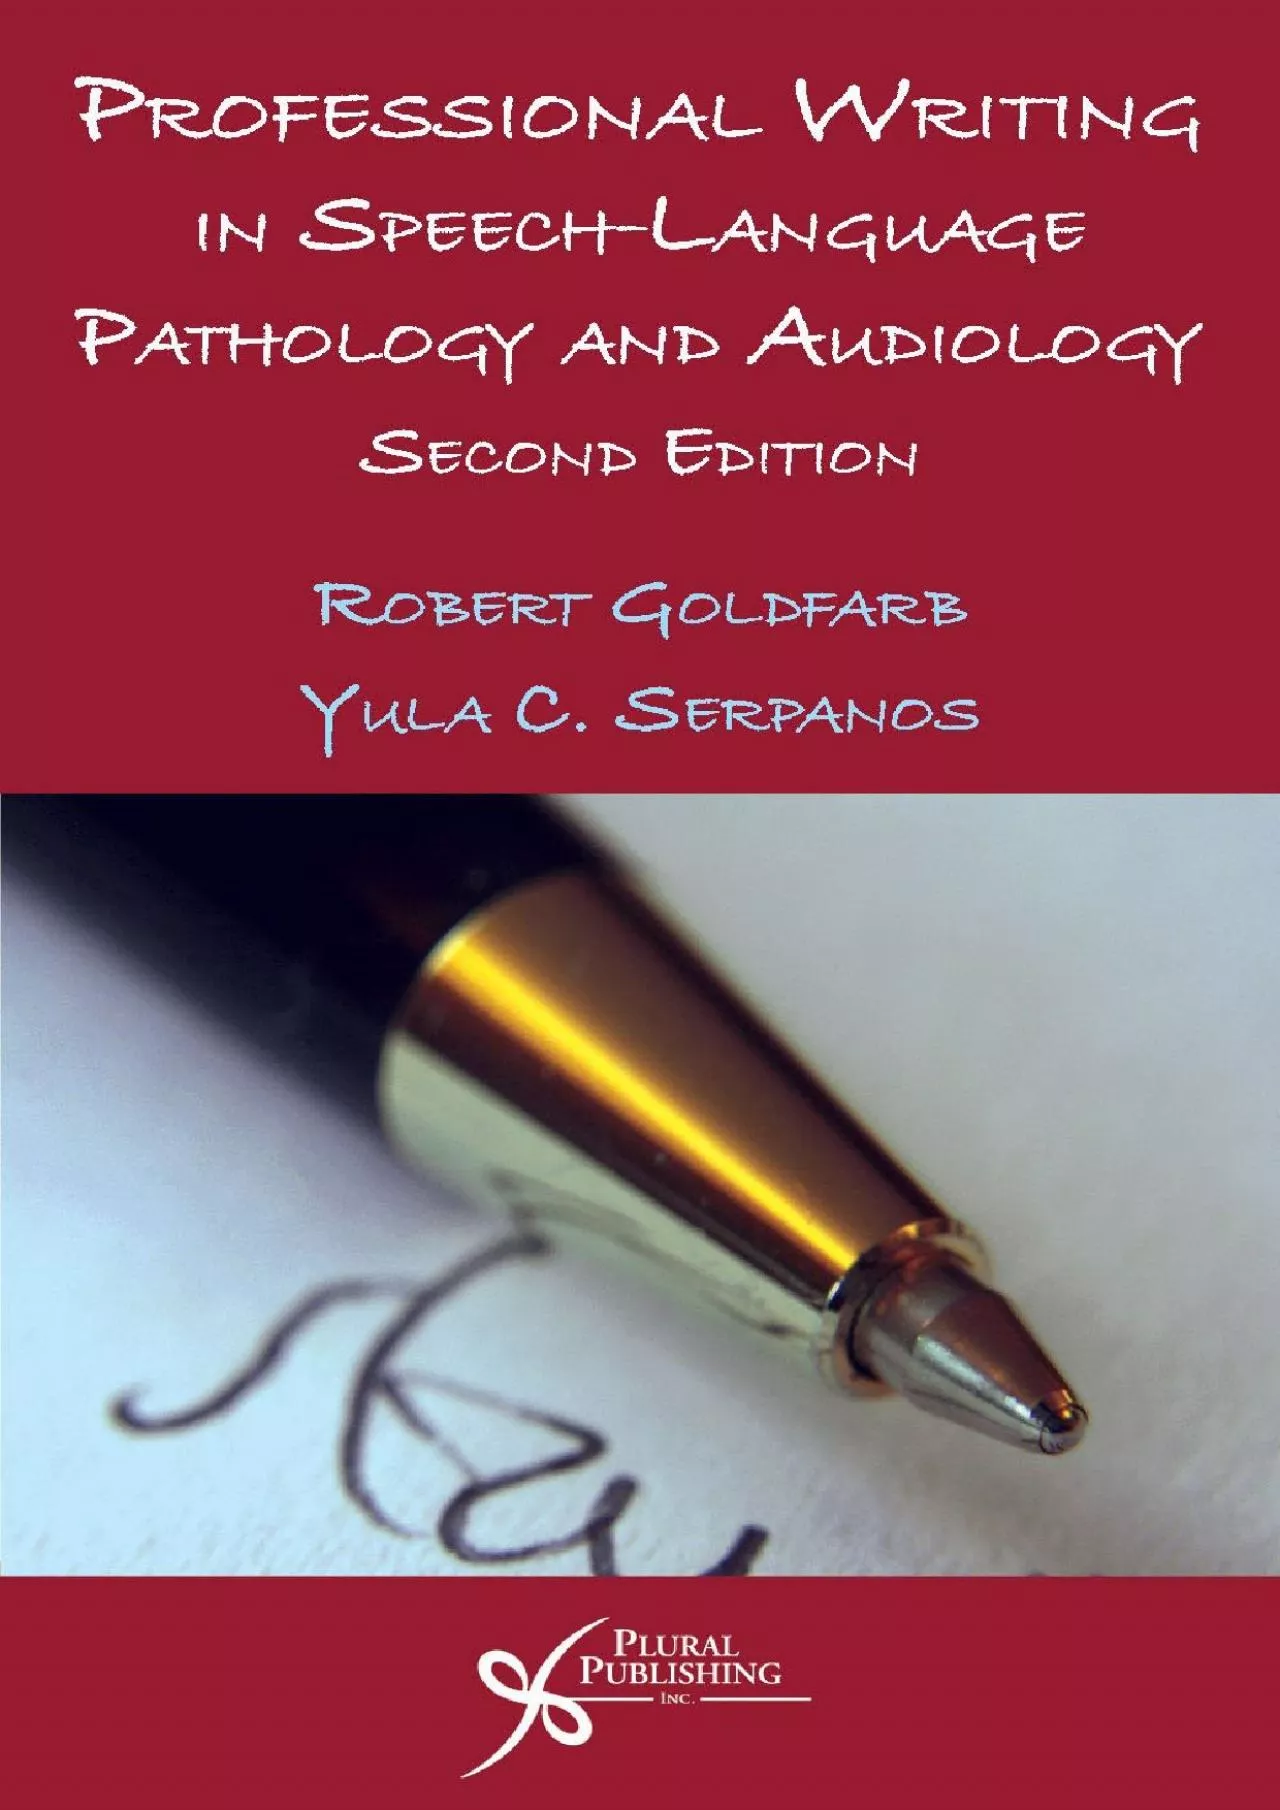 (BOOK)-Professional Writing in Speech-Language Pathology and Audiology